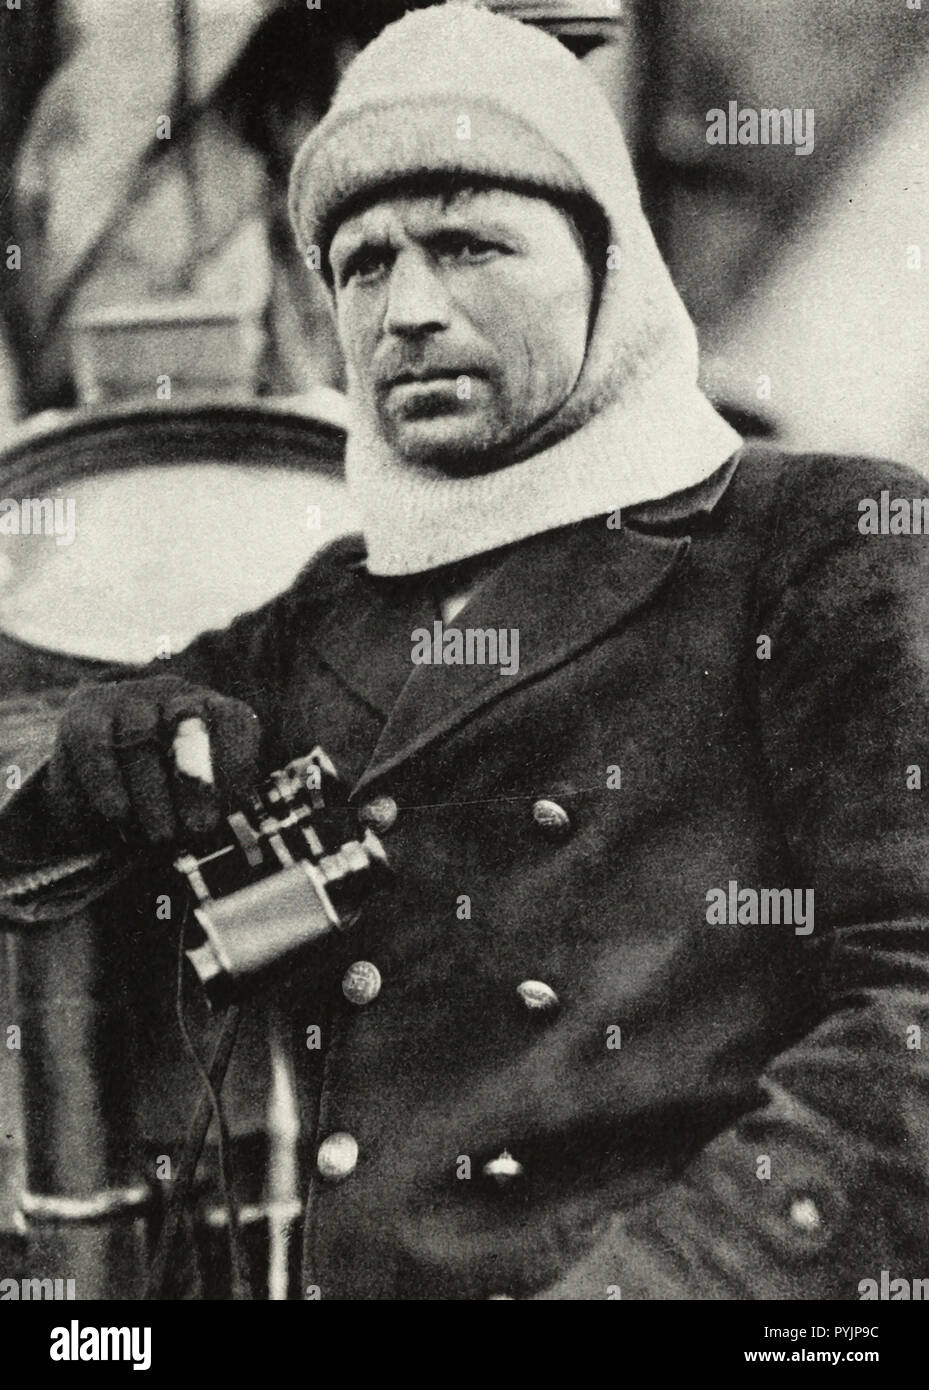 Frank Worsley, captain of the Endurance. He piloted the smal boat, the James Caird, across 750 miles of tempestuous ocean from Elephant Island to South Georgia to bring relief Stock Photo